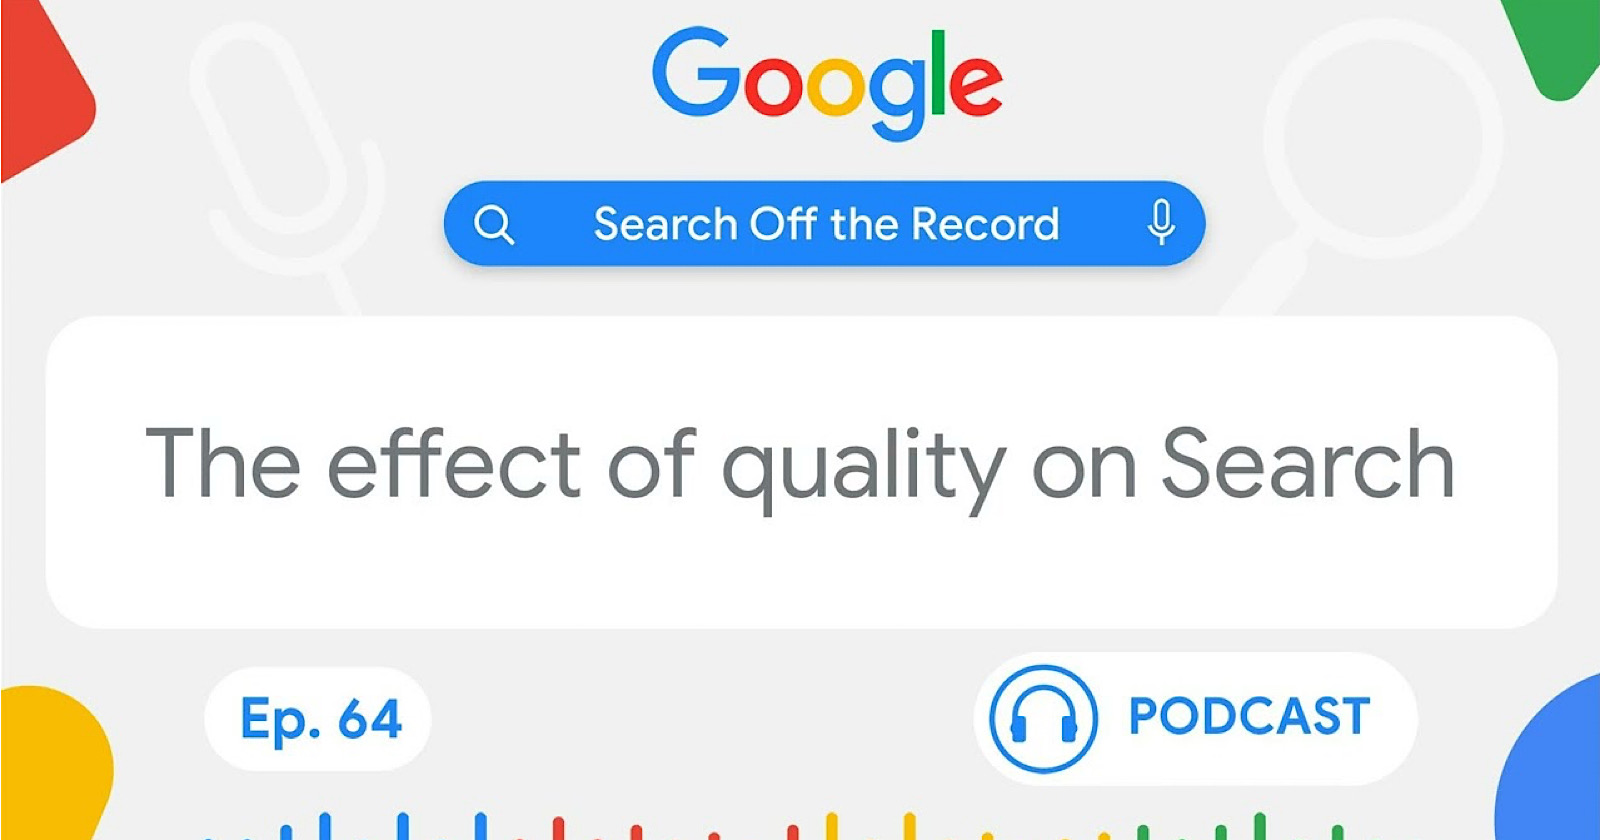 High quality Is Foremost Issue In Search Indexing